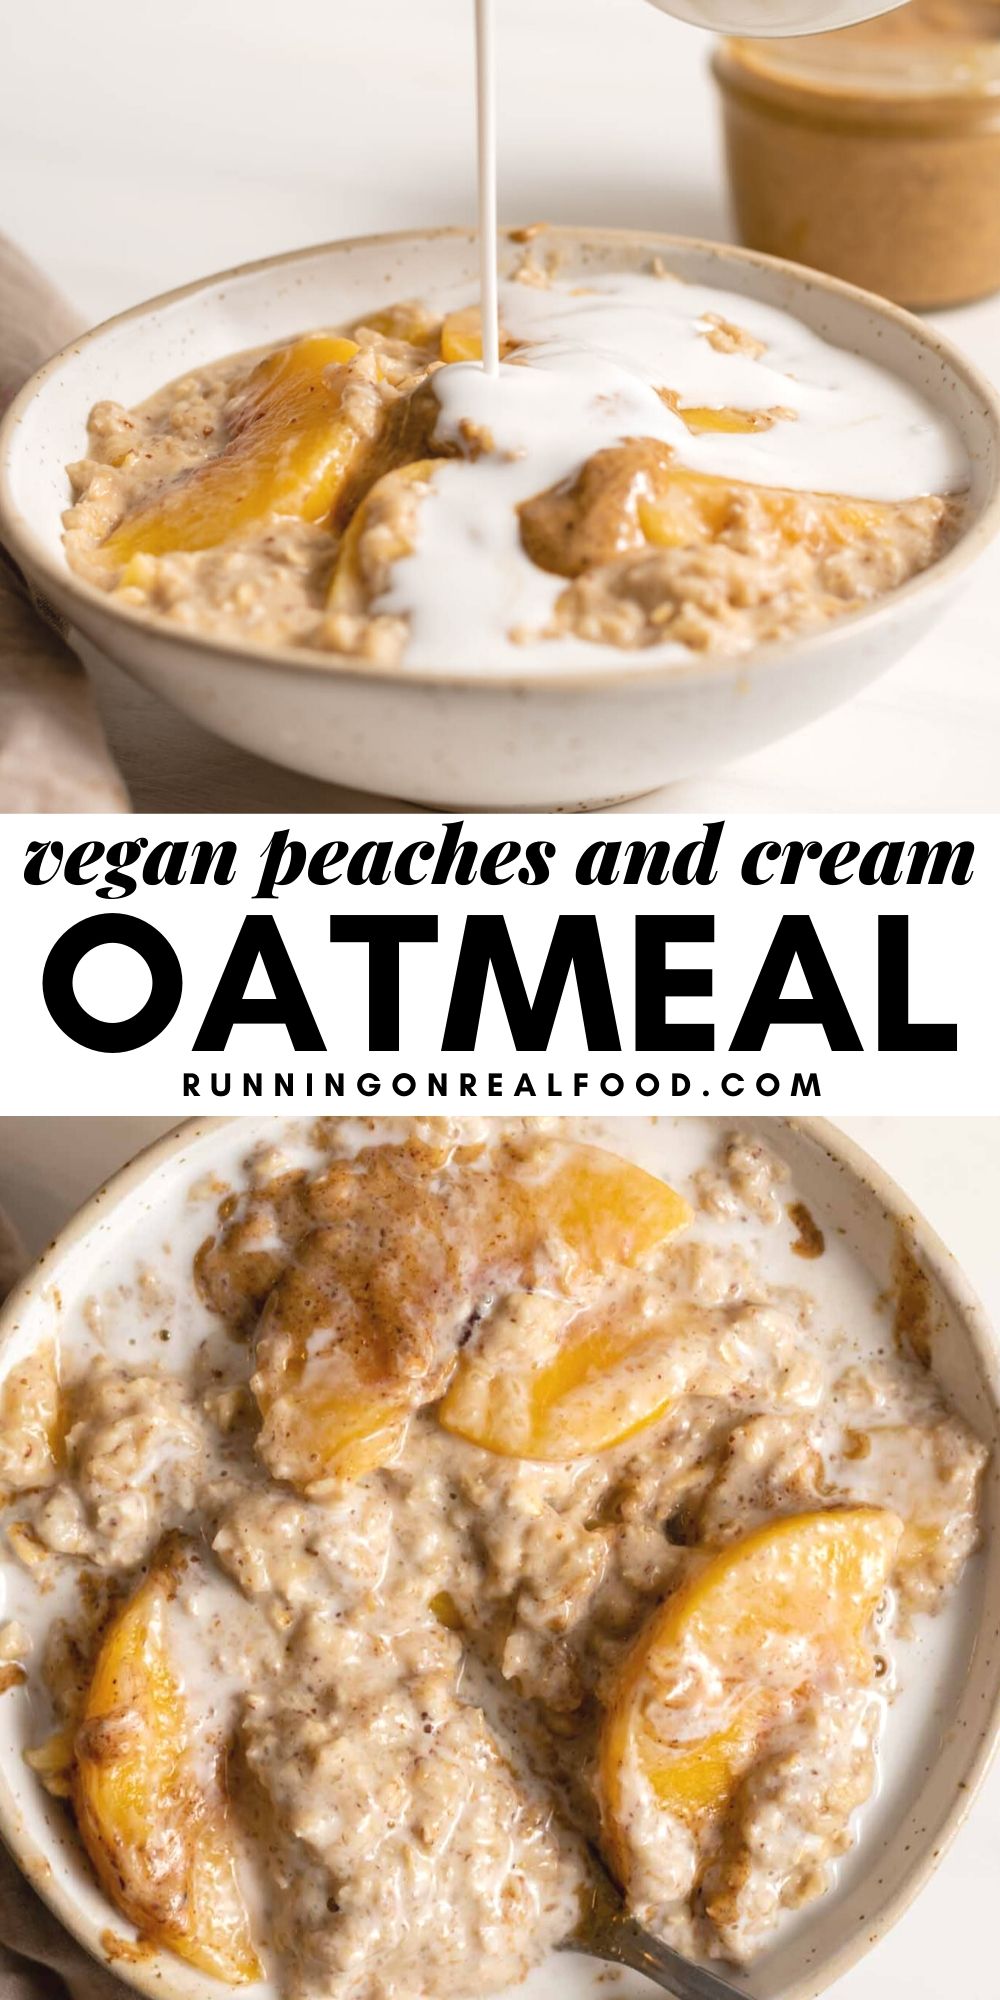 Vegan Peaches and Cream Oatmeal - Running on Real Food